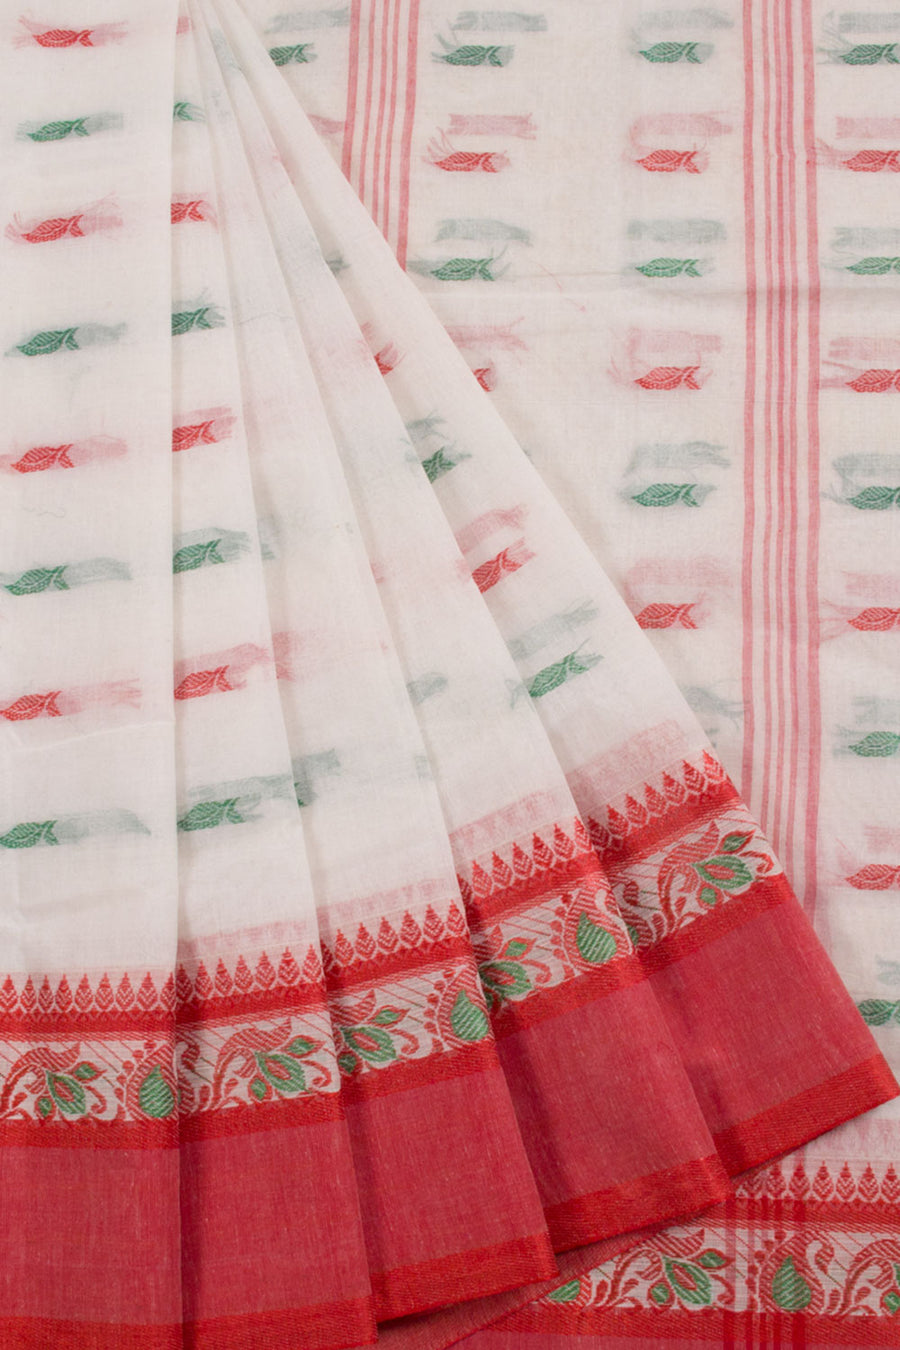 Handwoven Bengal Tant Cotton Saree with Floral Motifs, Floral Paisley Border and Floral stripes Design Pallu